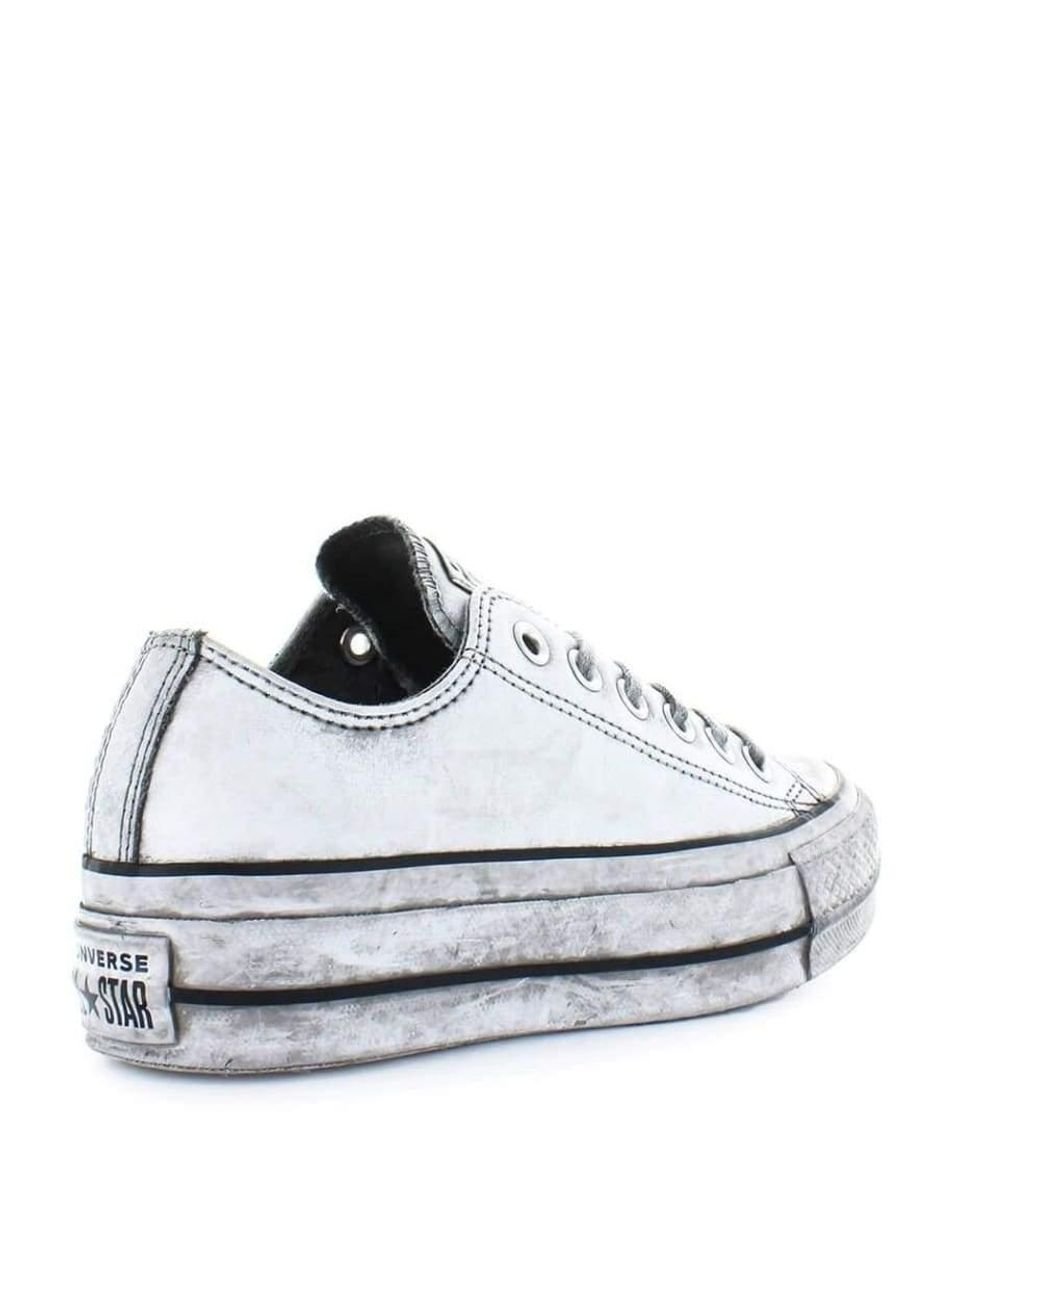 Converse Shoes All Star Platform White Smoke In Sneaker Fall Winter 2019 |  Lyst Canada